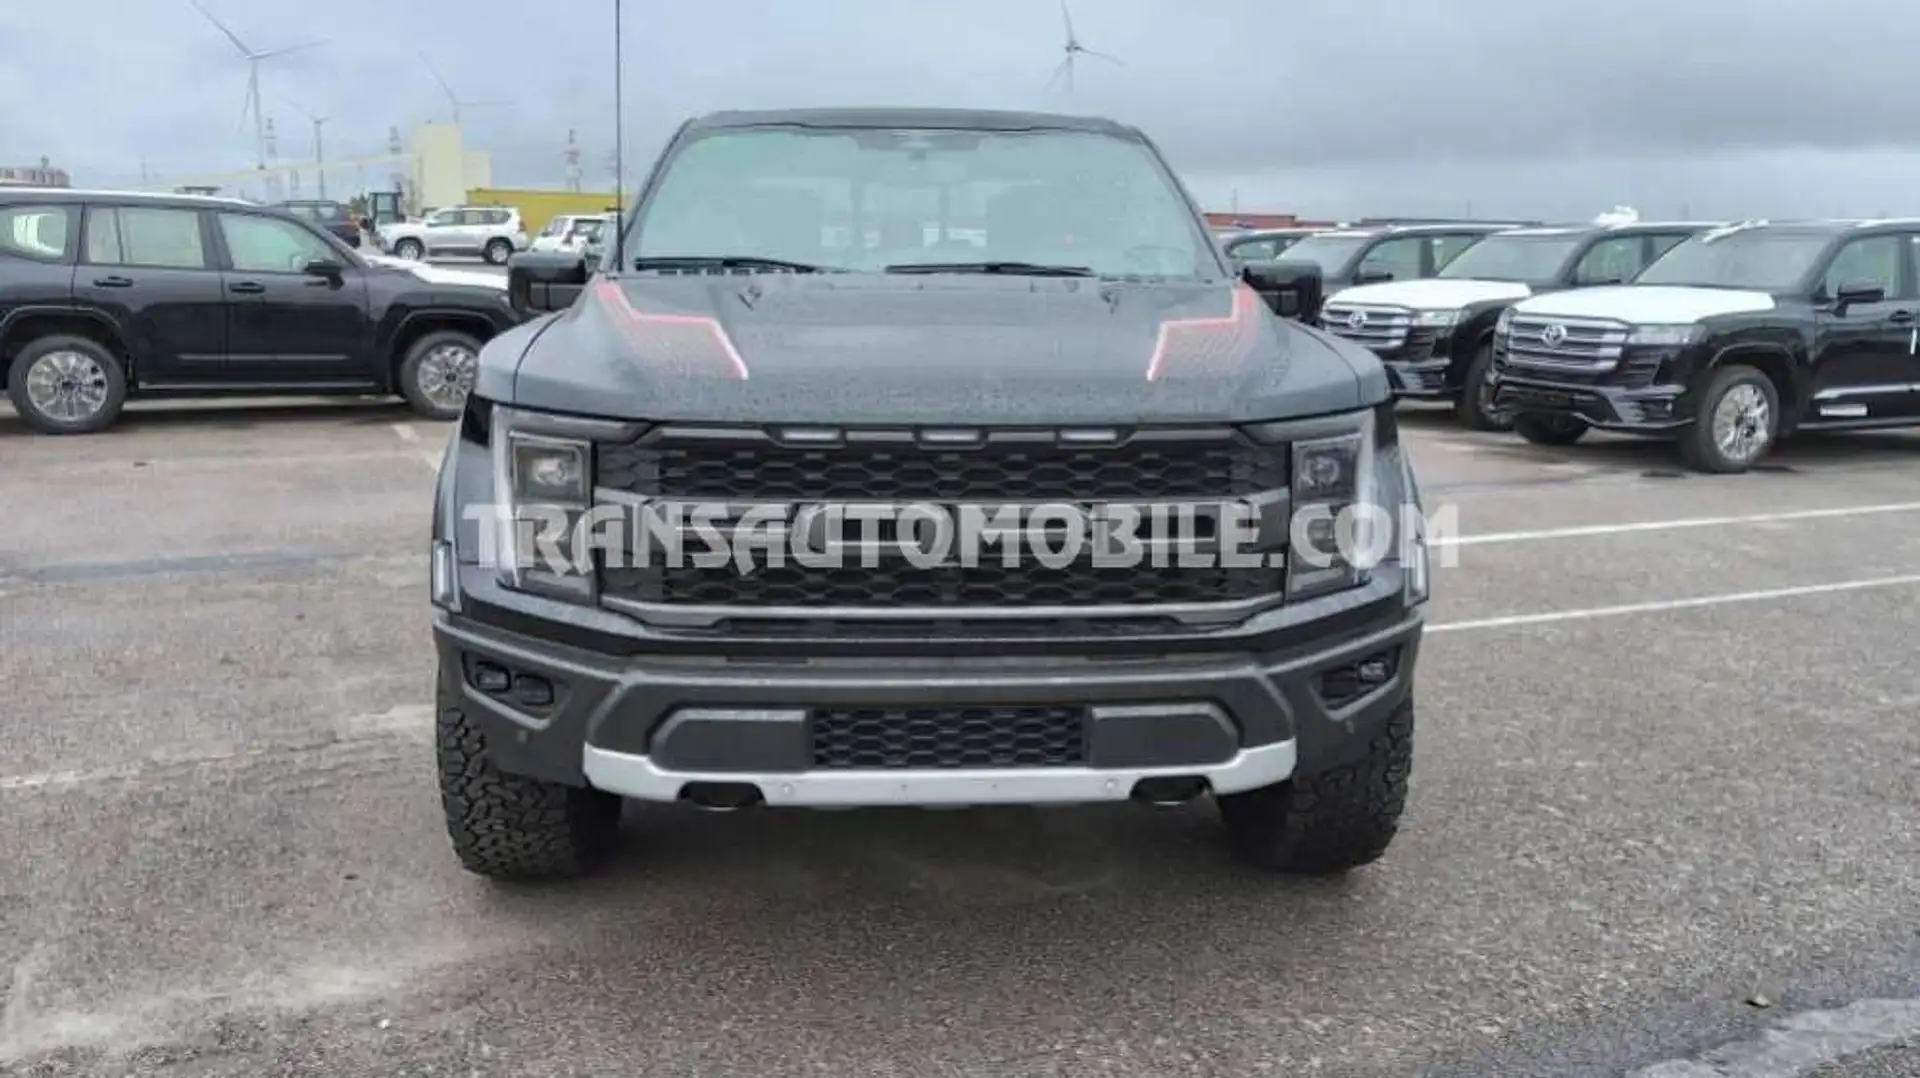 Ford F 150 RAPTOR - EXPORT OUT EU TROPICAL VERSION - EXPORT O Gris - 2